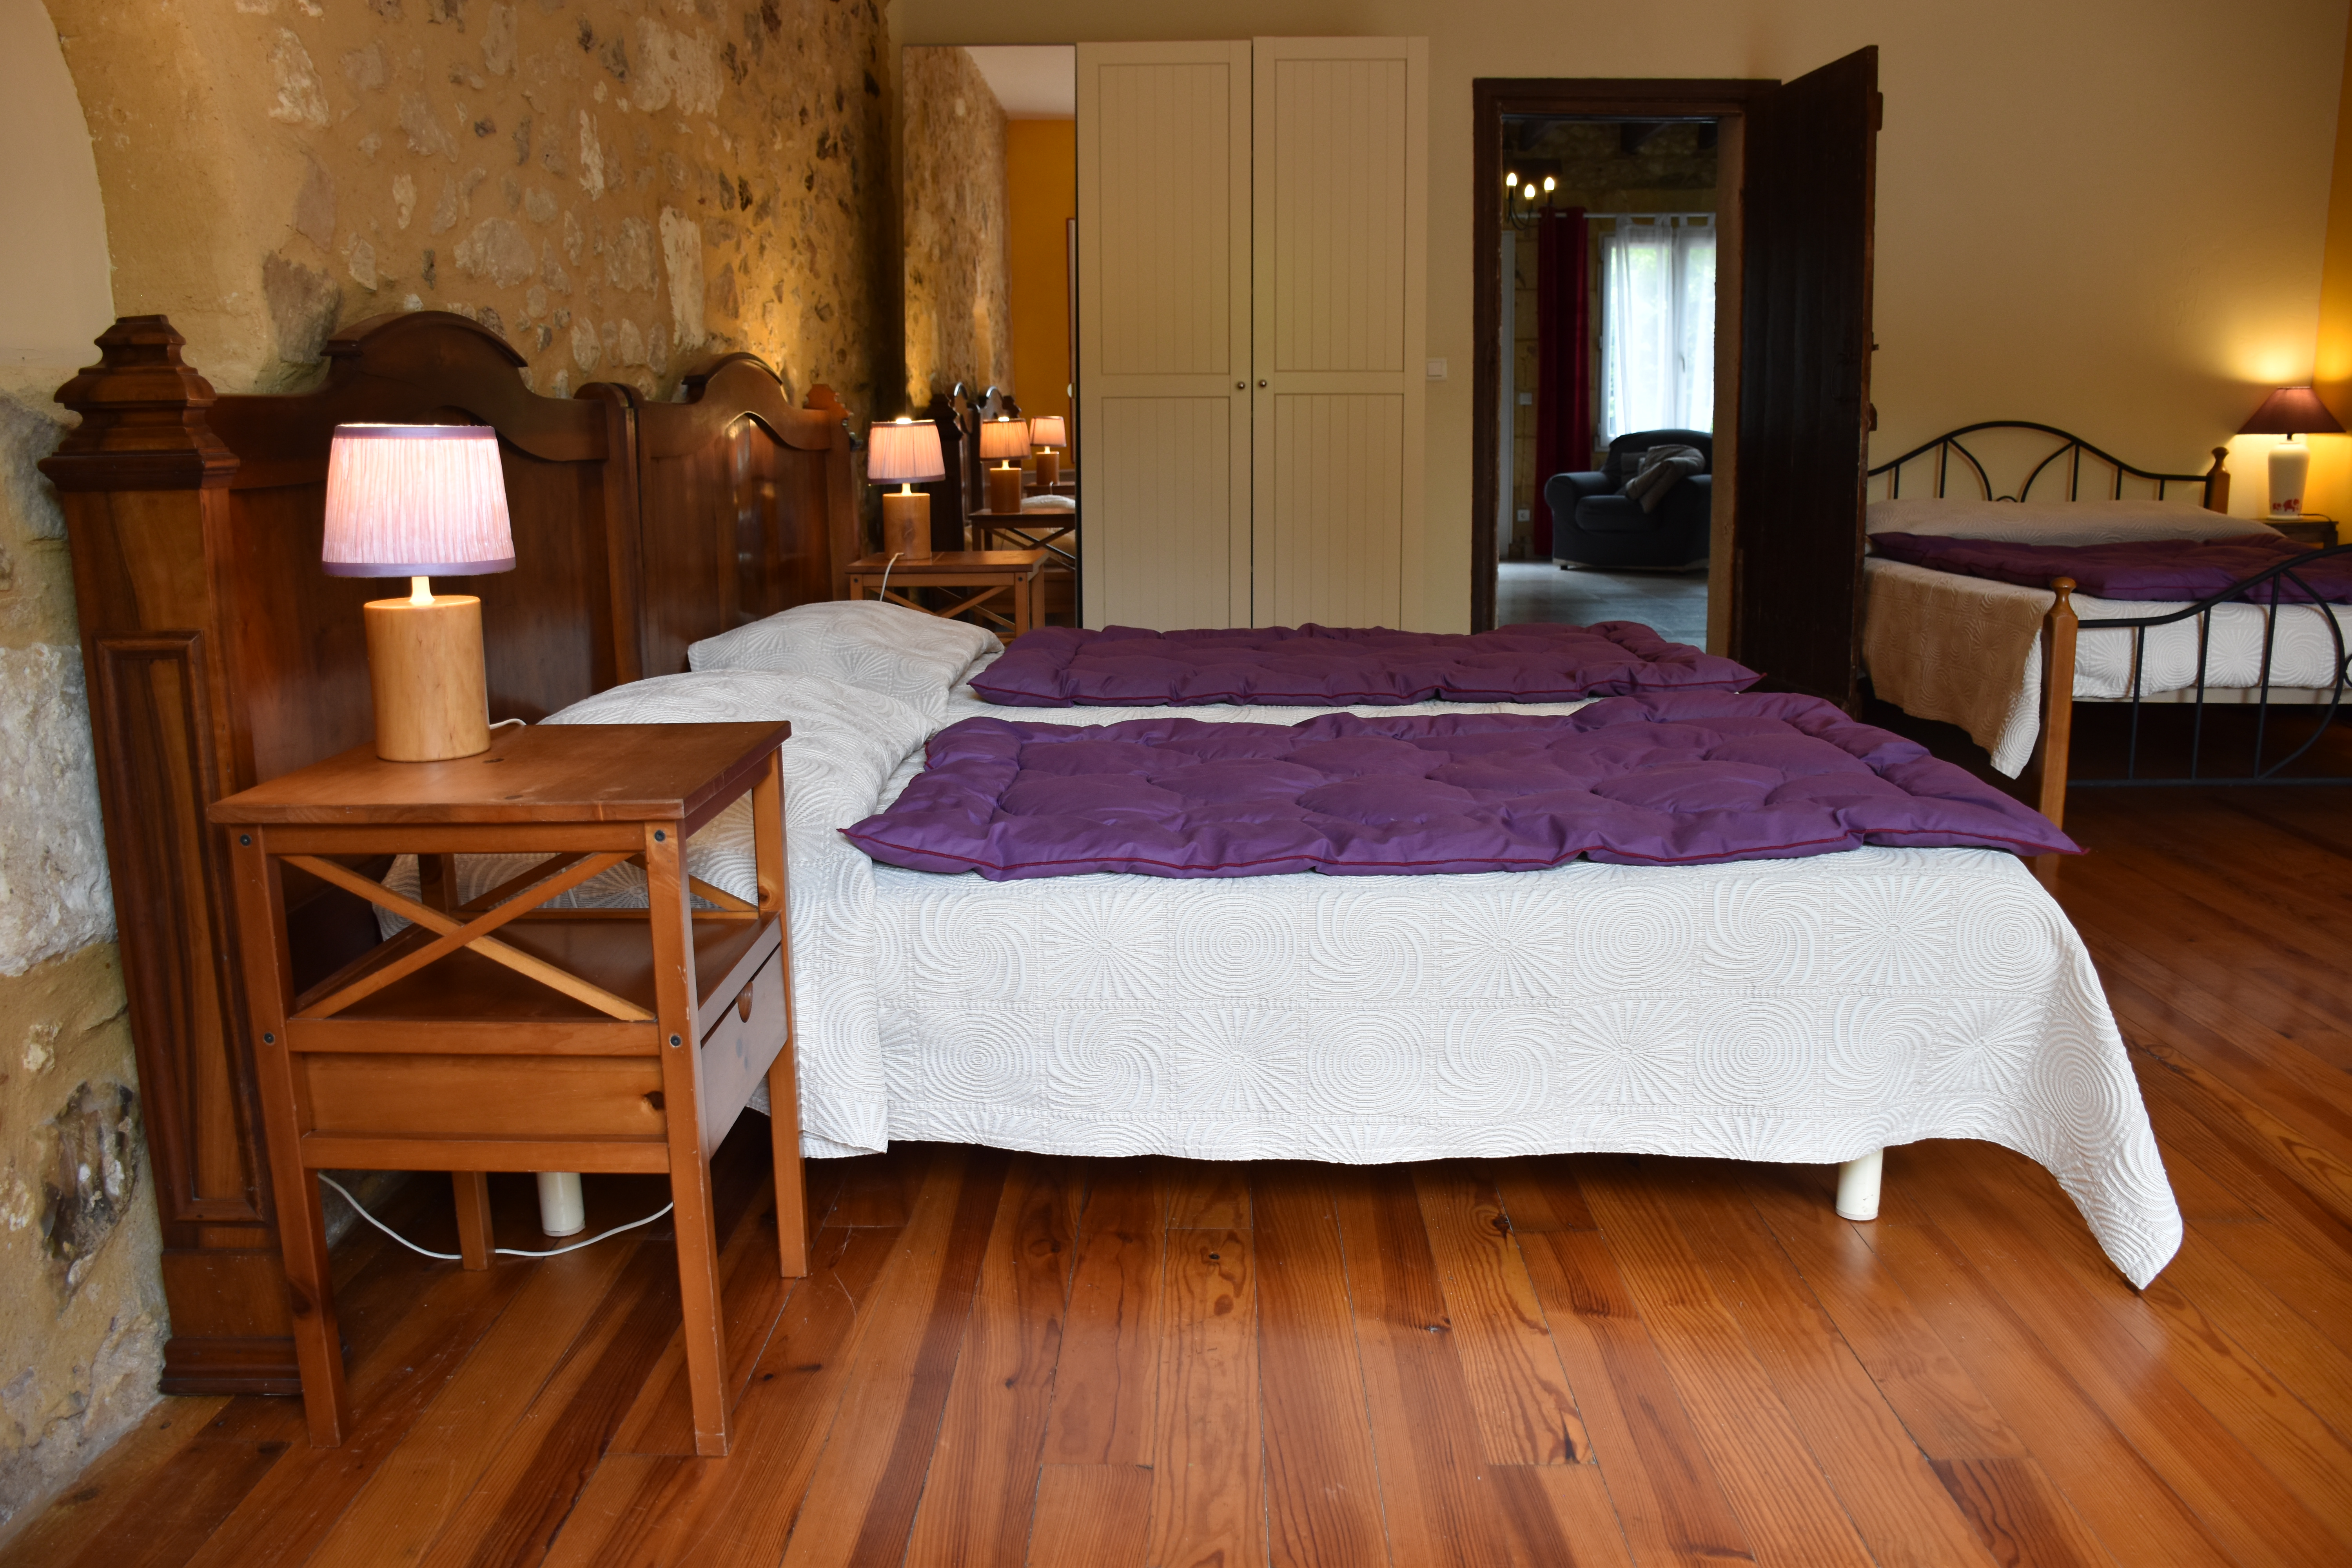 triple bedroom 5 guests holiday rental - chambre triple gite 5 personnes